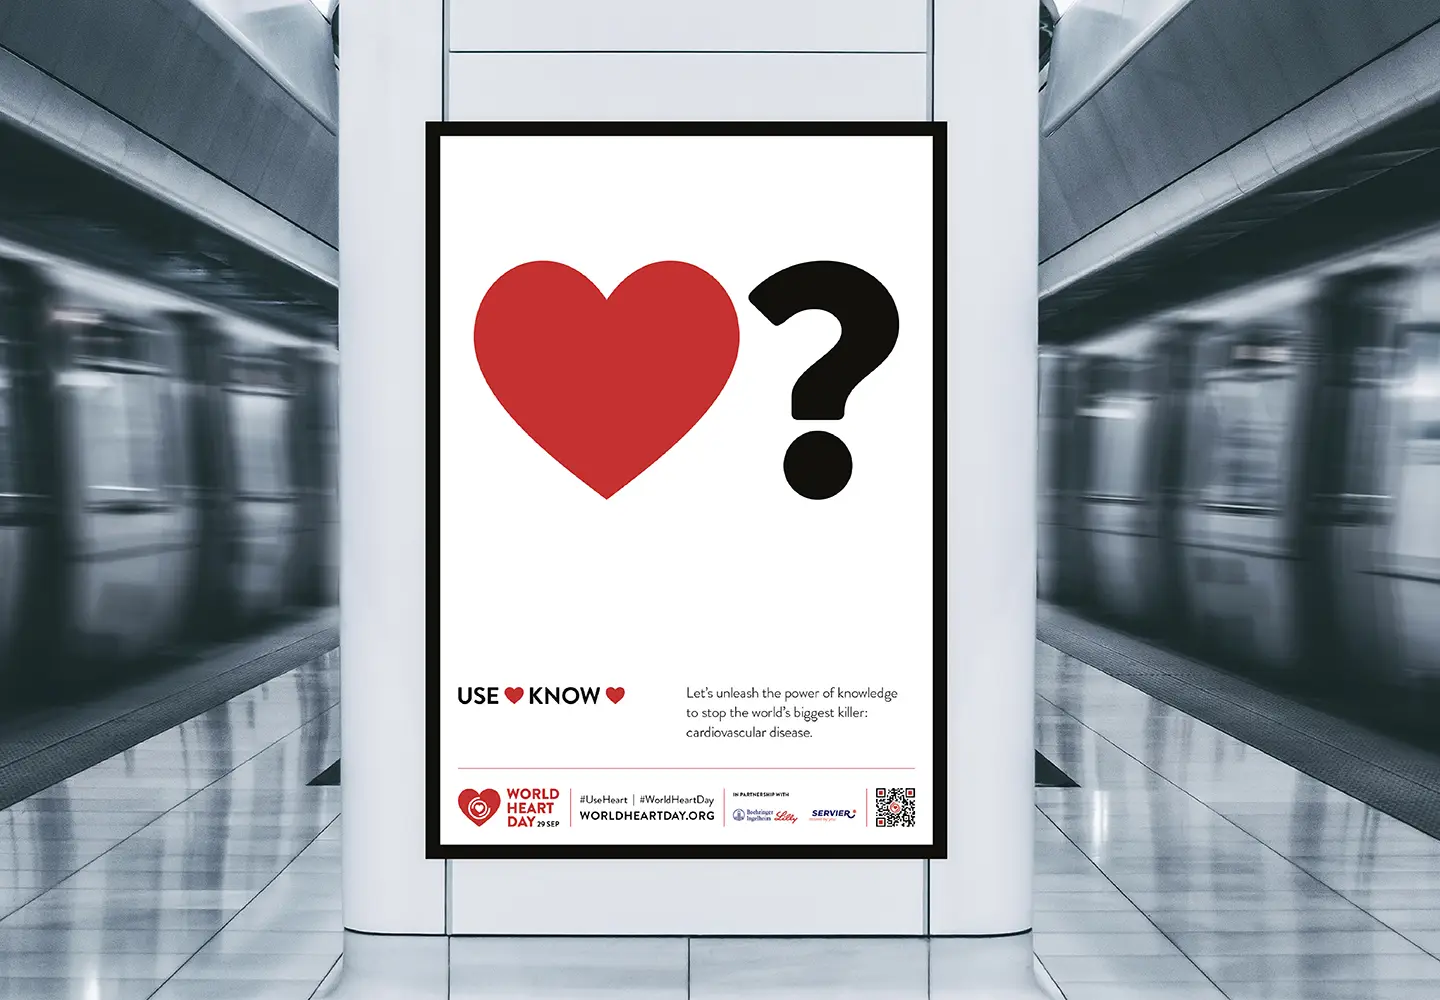 World Heart Day campaign poster on display at a tube station